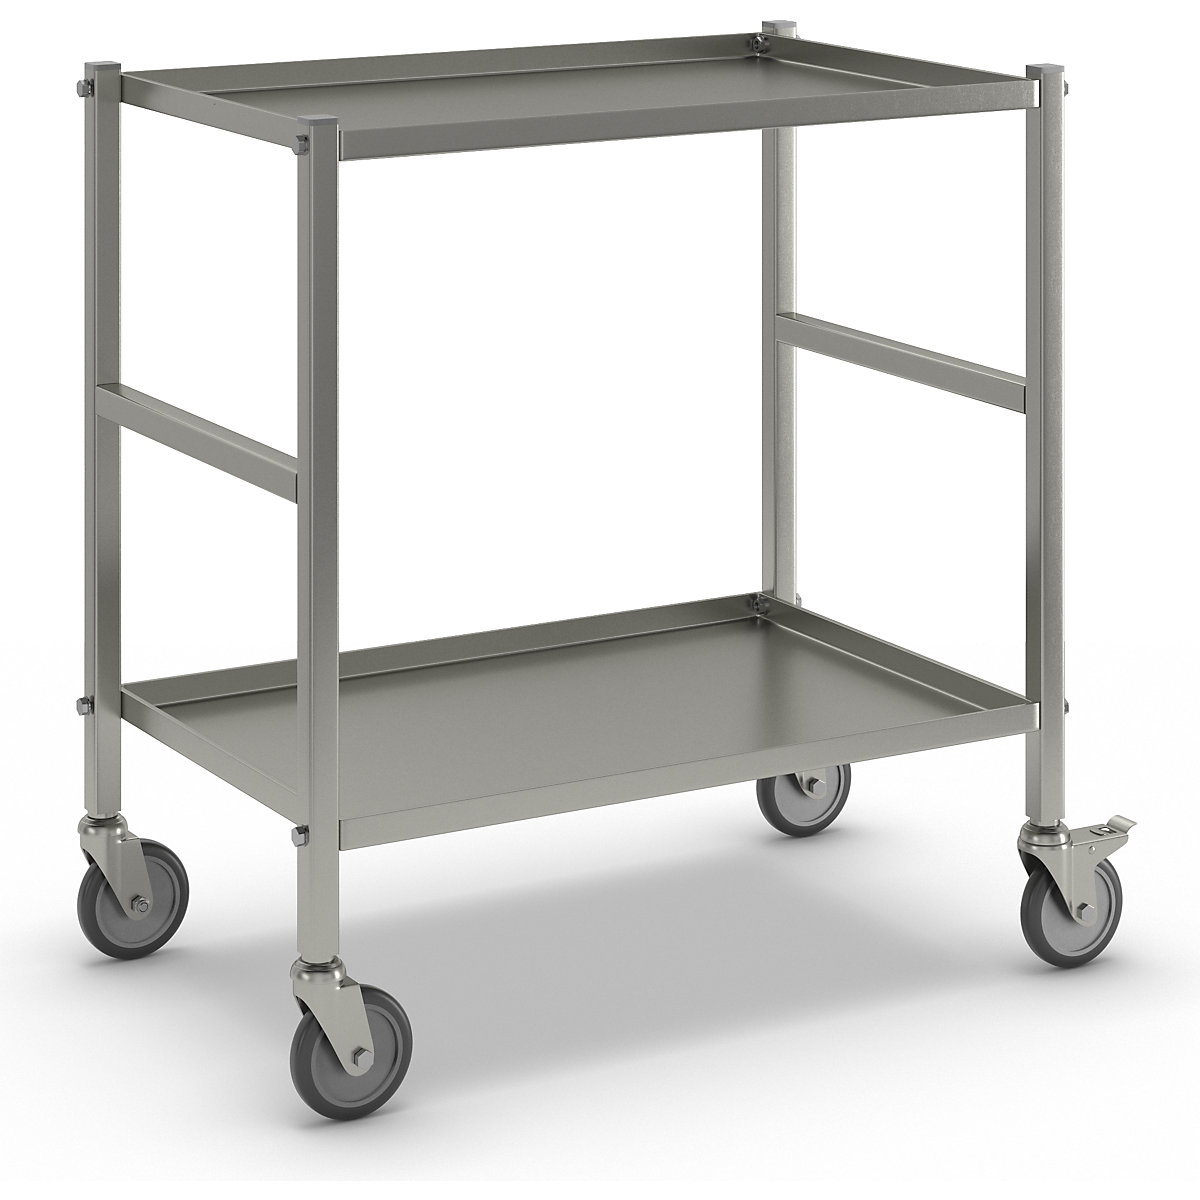 Table trolley with 2 shelves – Kongamek, 4 swivel castors, 2 with stops, electrolytically zinc plated-14